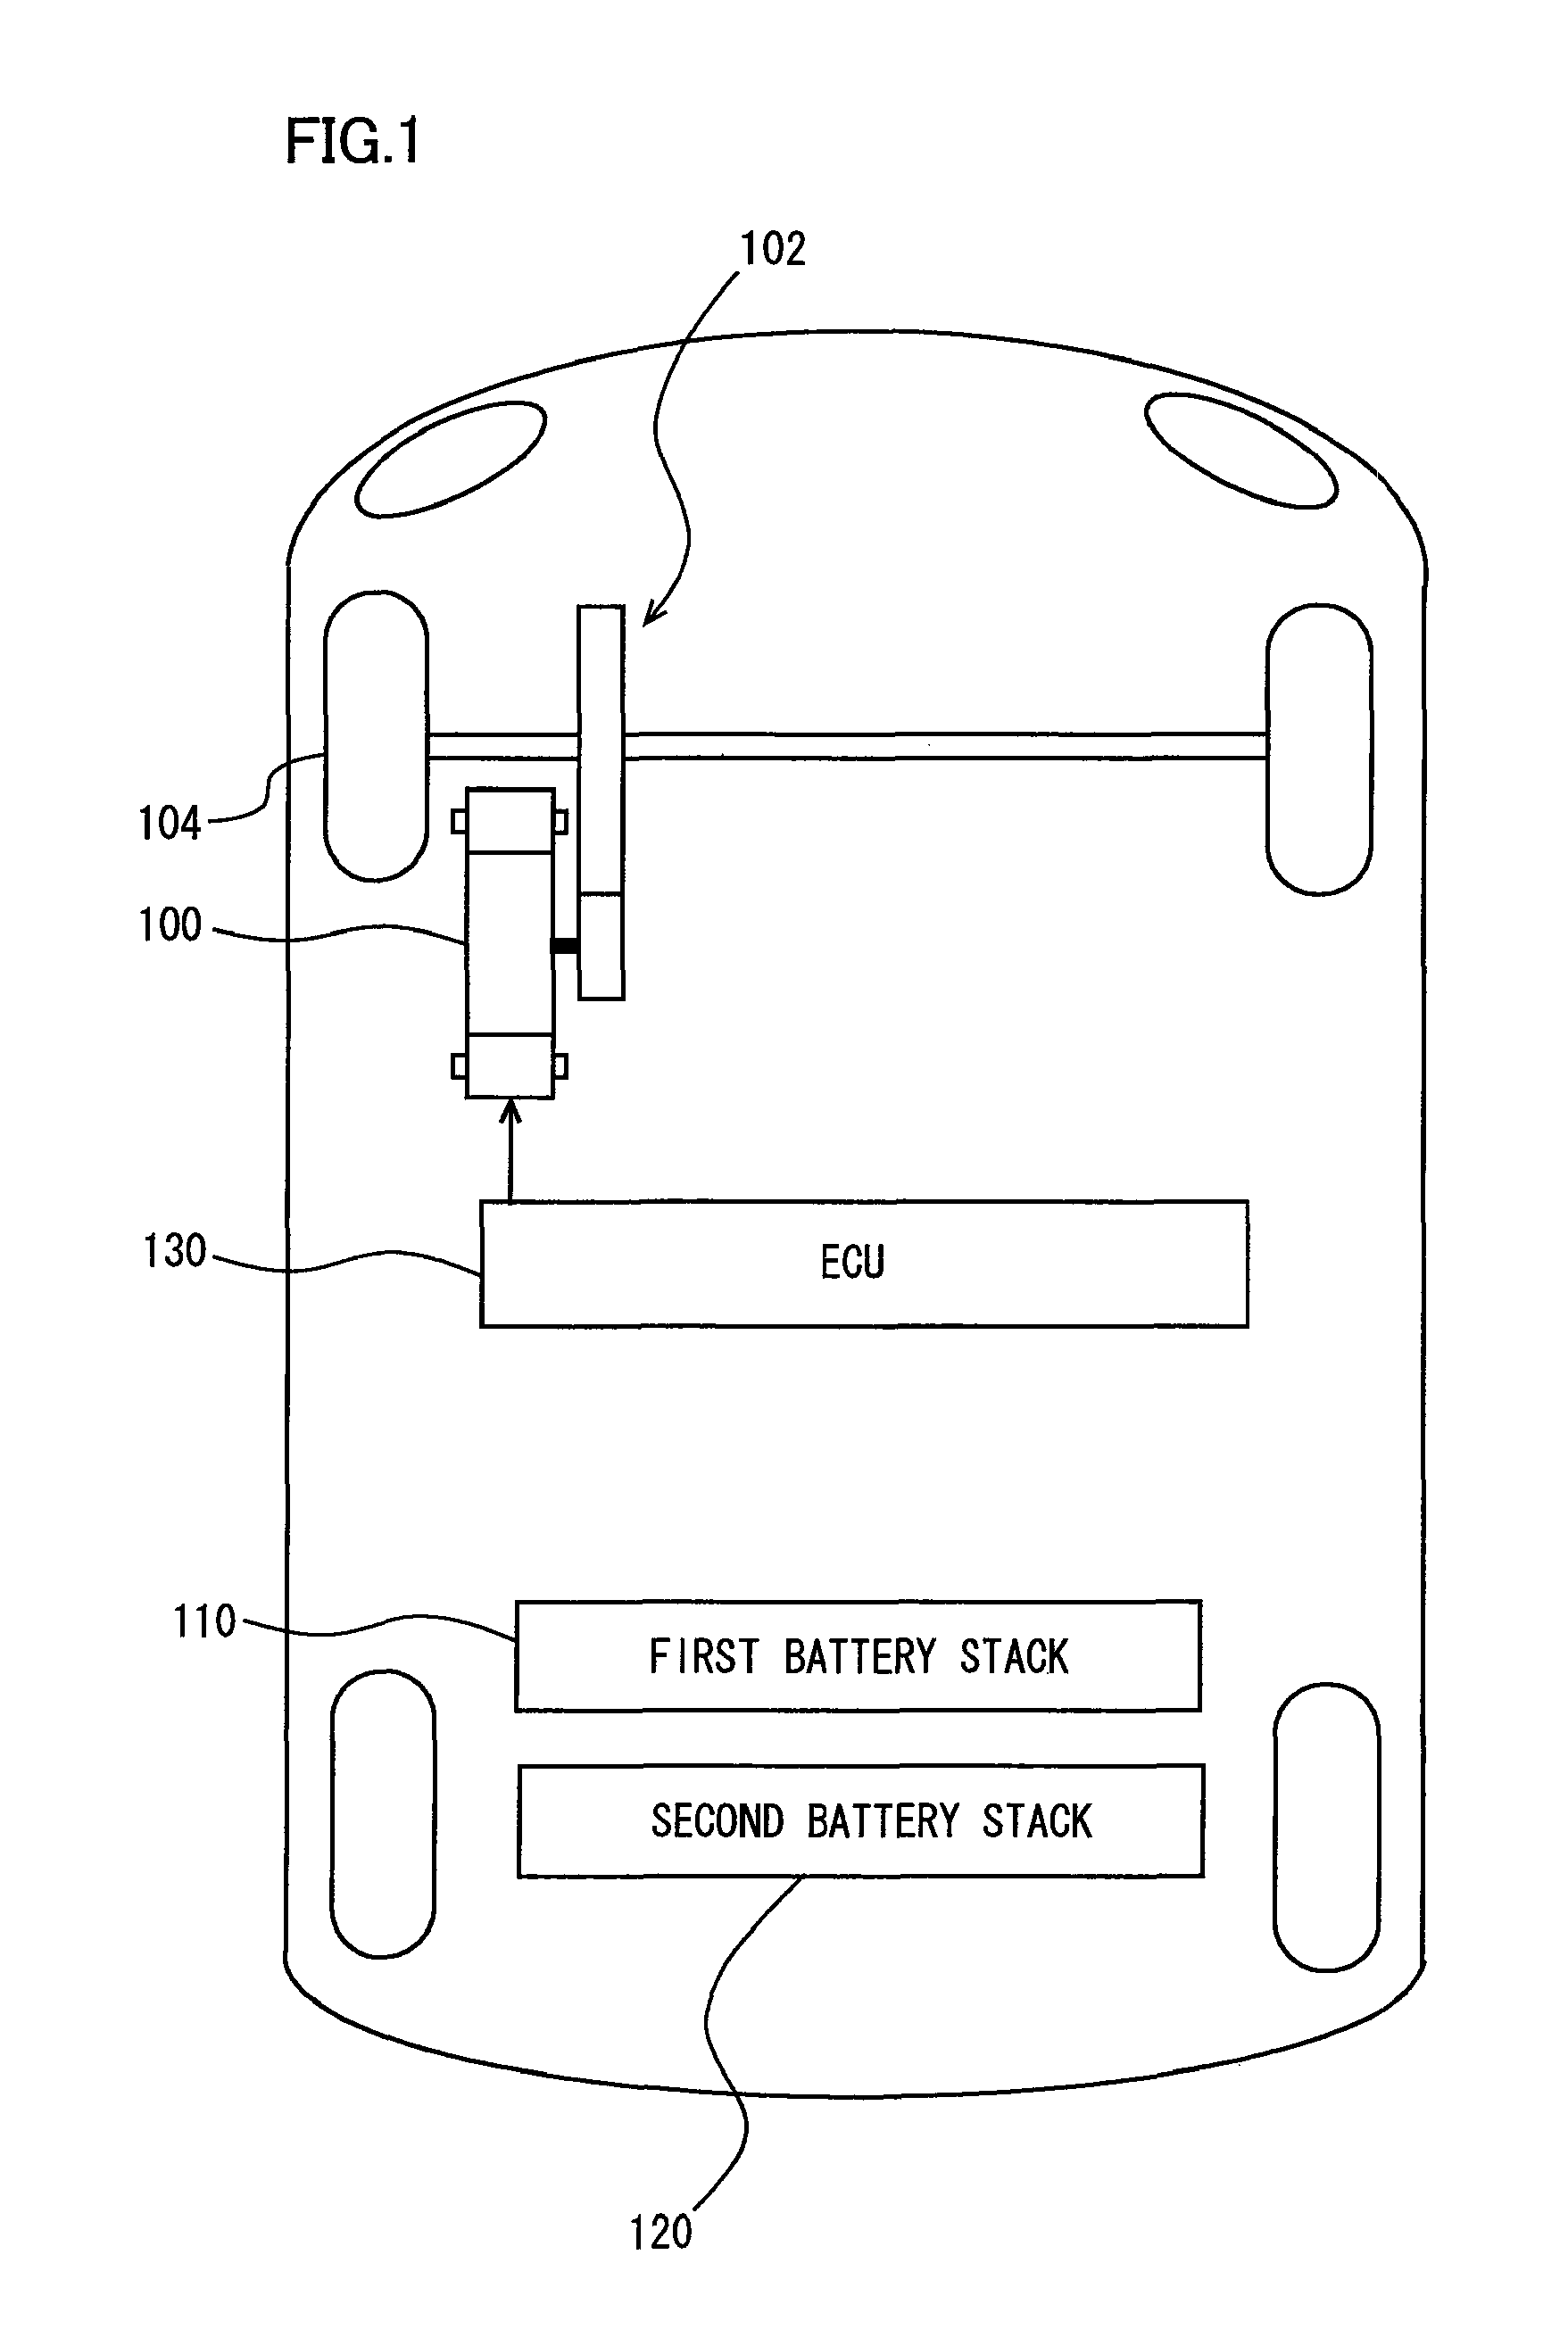 Apparatus for calculating state of charge, method of calculating state of charge, and electric system